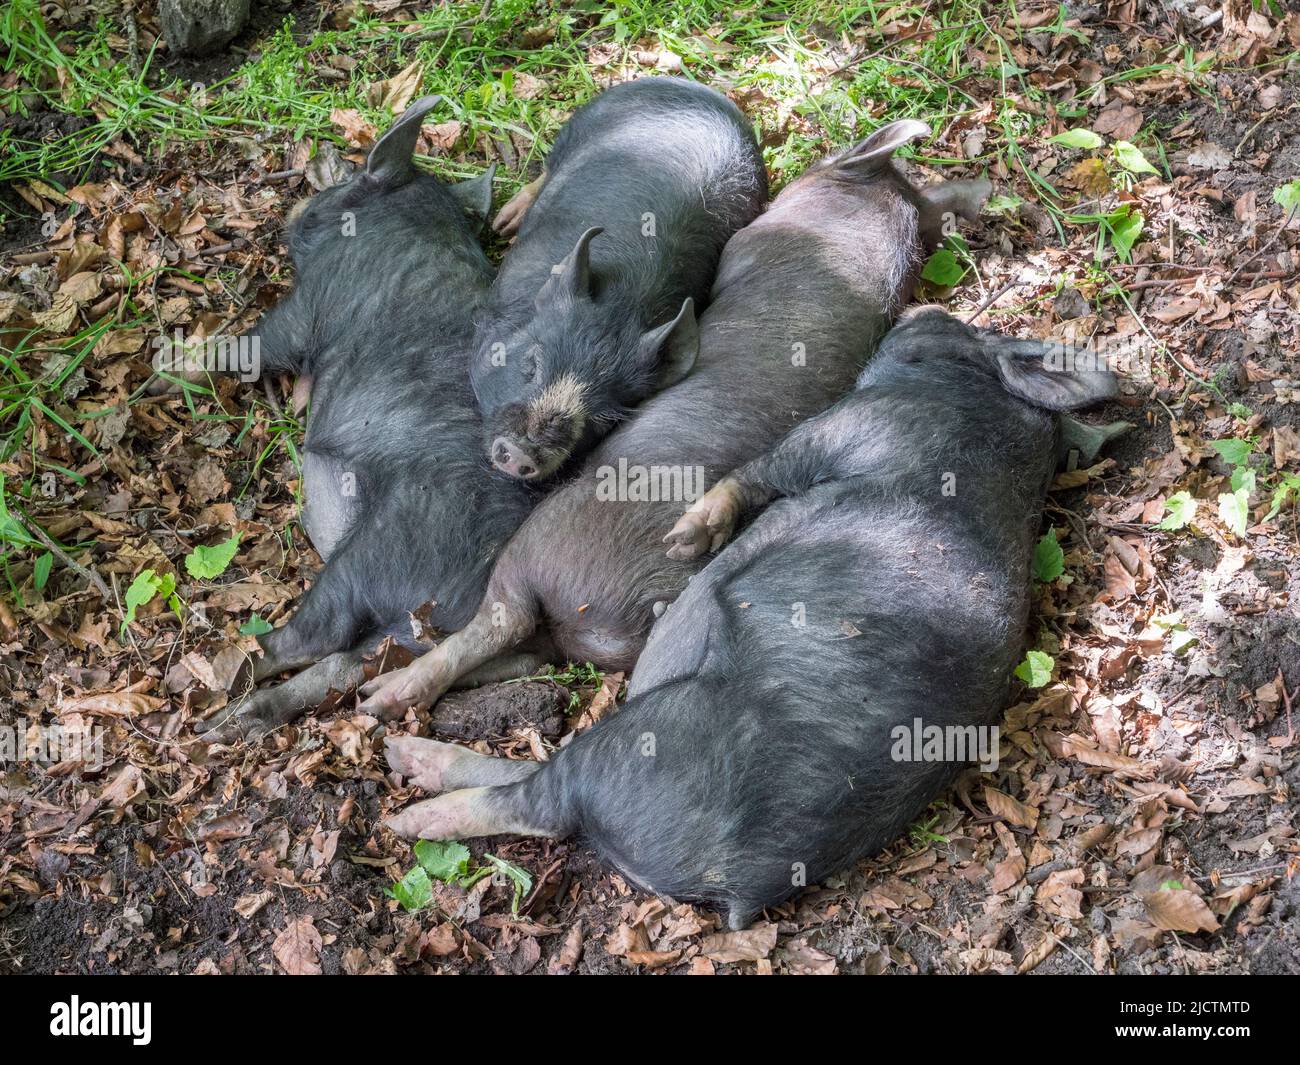 A group (drift/drove) of gray/black piglets (possibly Berkshire pigs) in Dorset, UK. Stock Photo